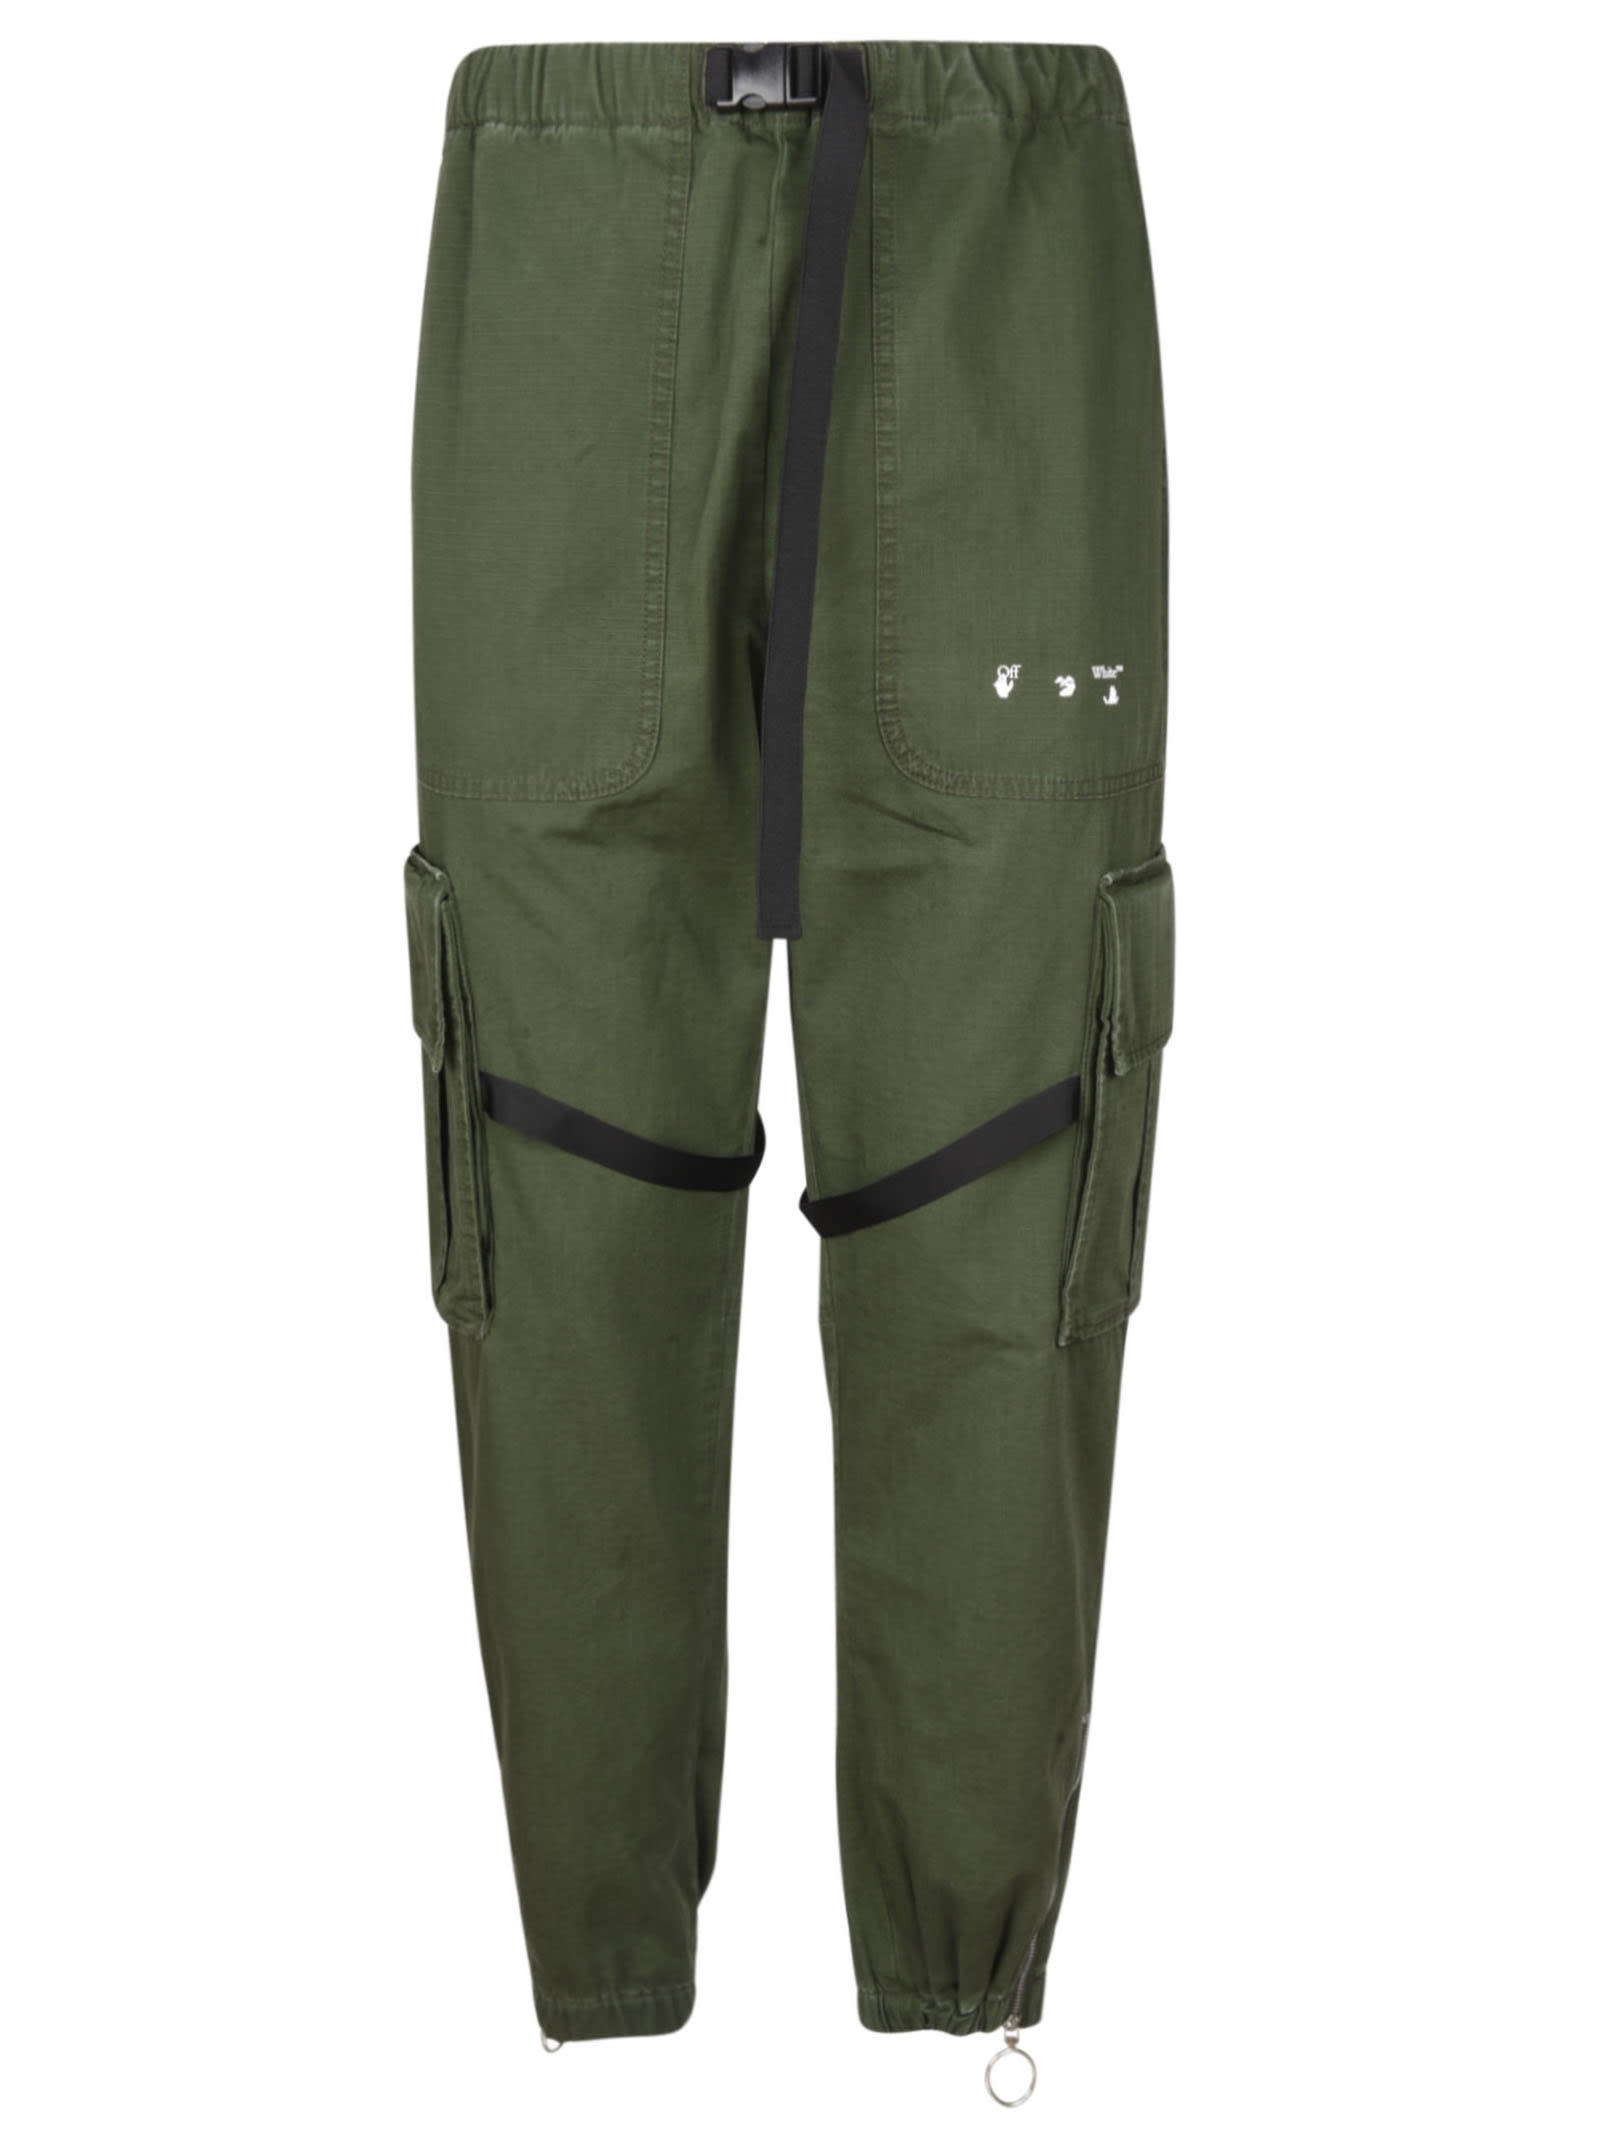 OFF-WHITE PARACHUTE CARGO PANTS,OMCF004S21 FAB0025701